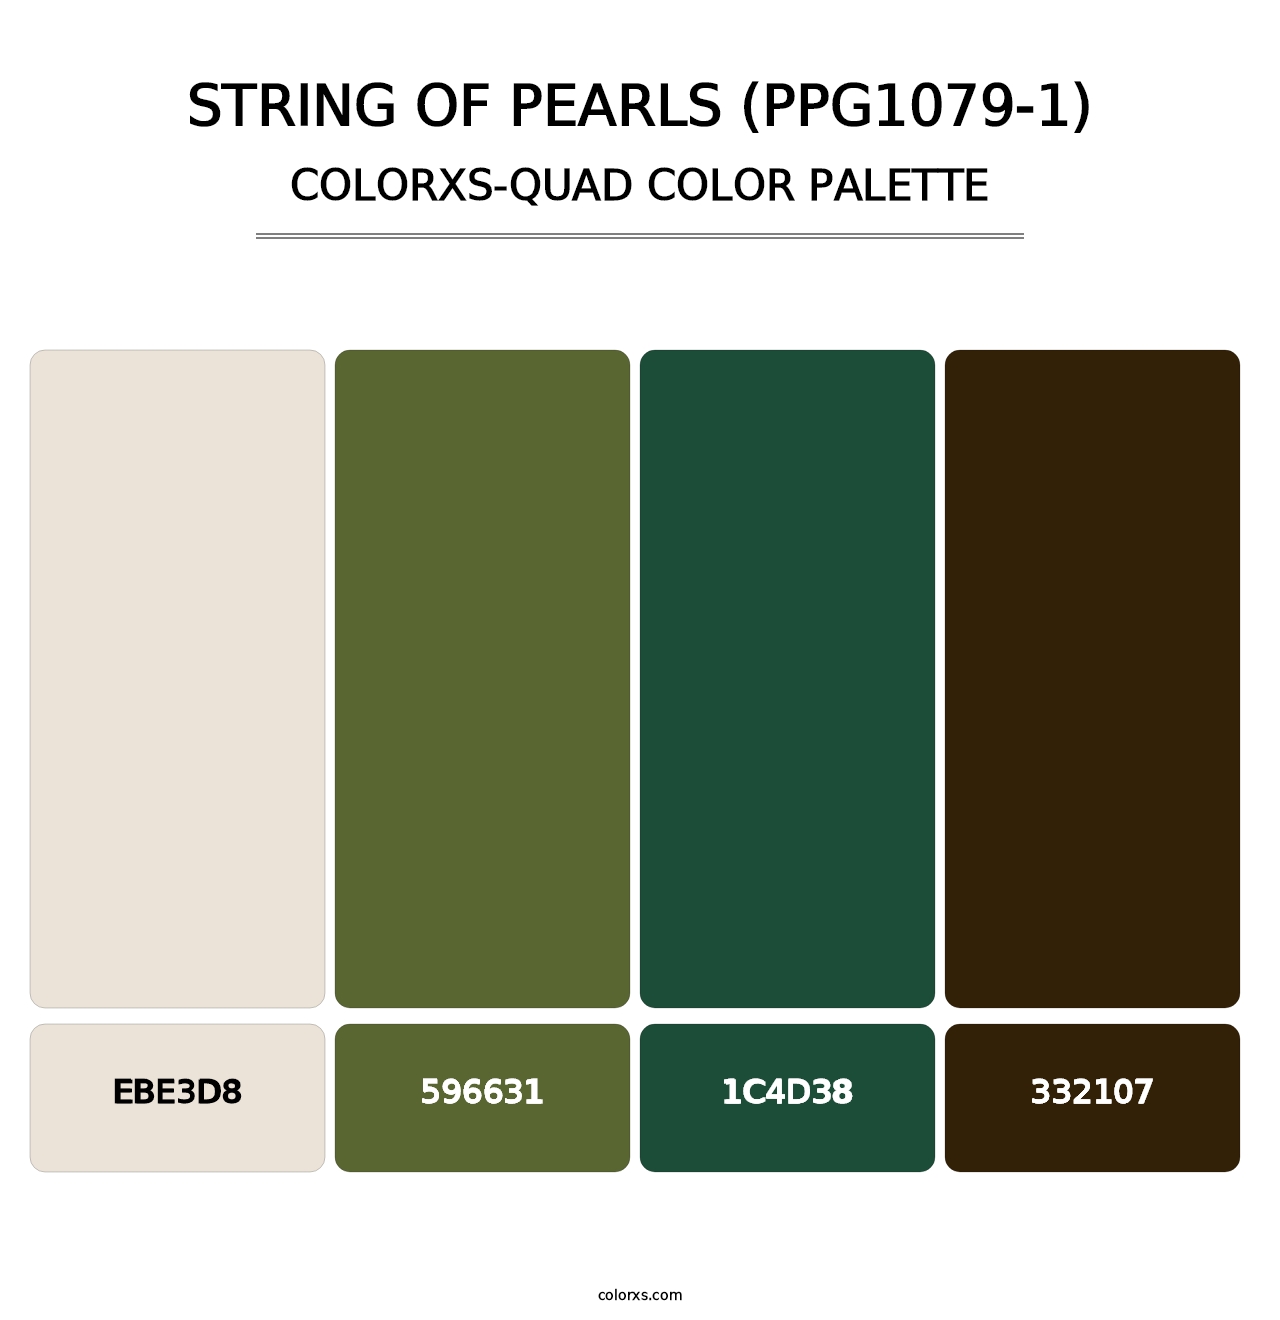 String Of Pearls (PPG1079-1) - Colorxs Quad Palette